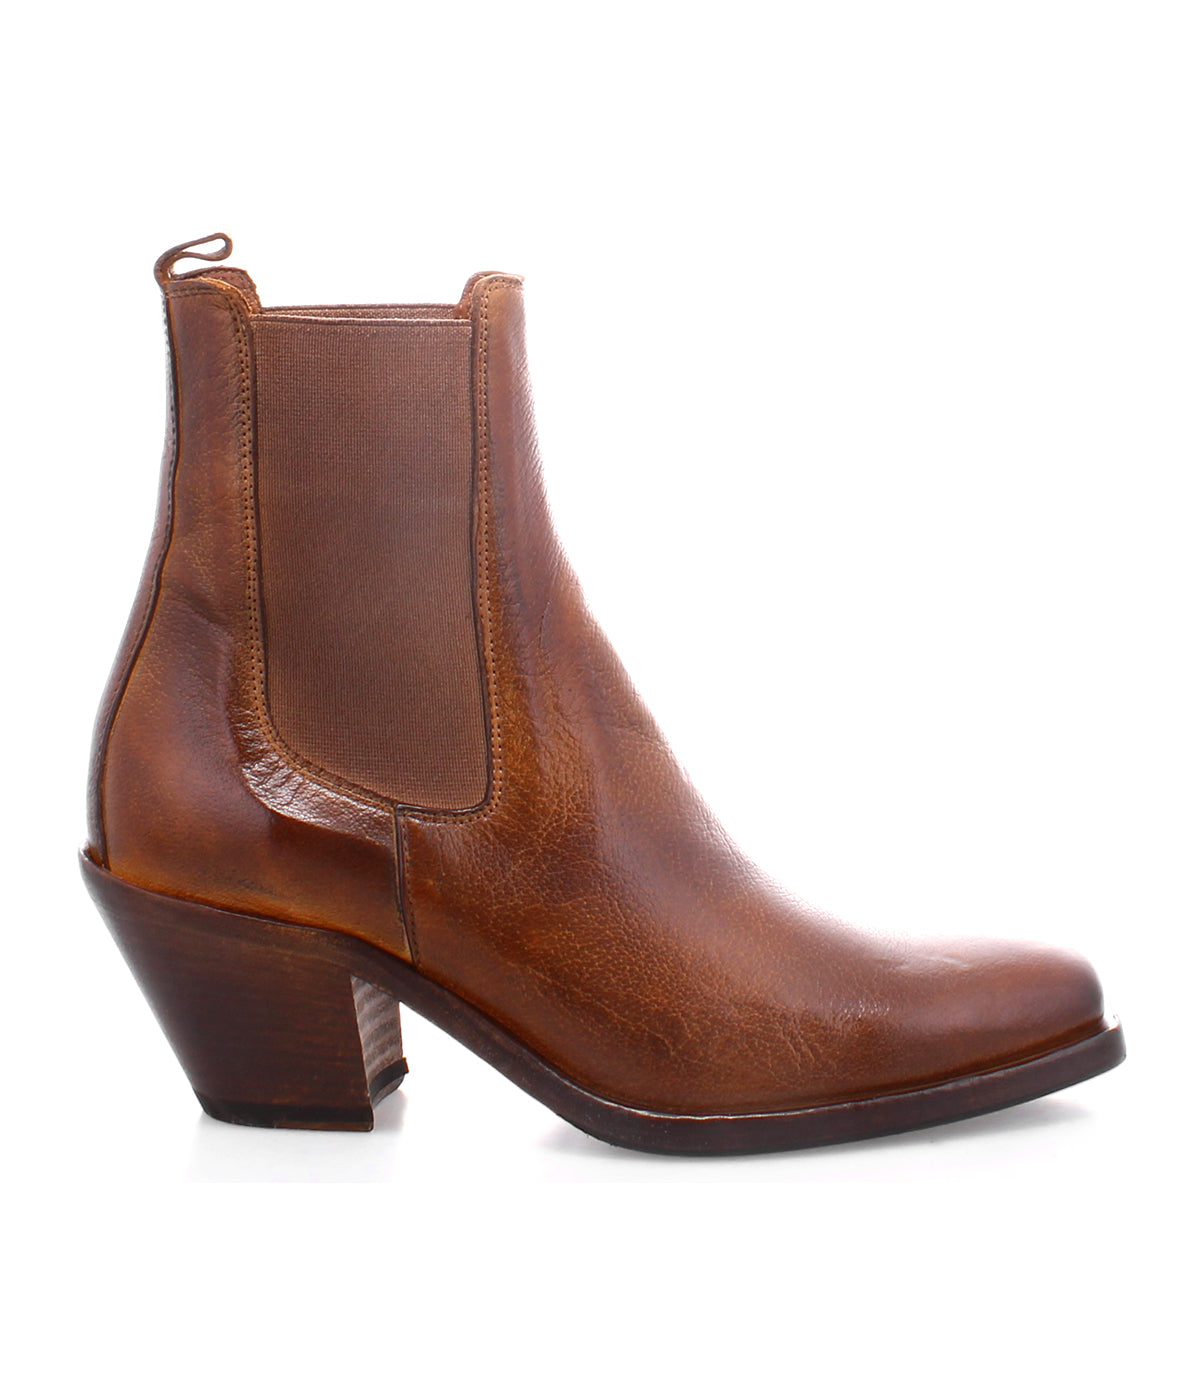 The durable women's Viscera Chelsea boot in tan leather from Bed Stu exudes sartorial elegance.